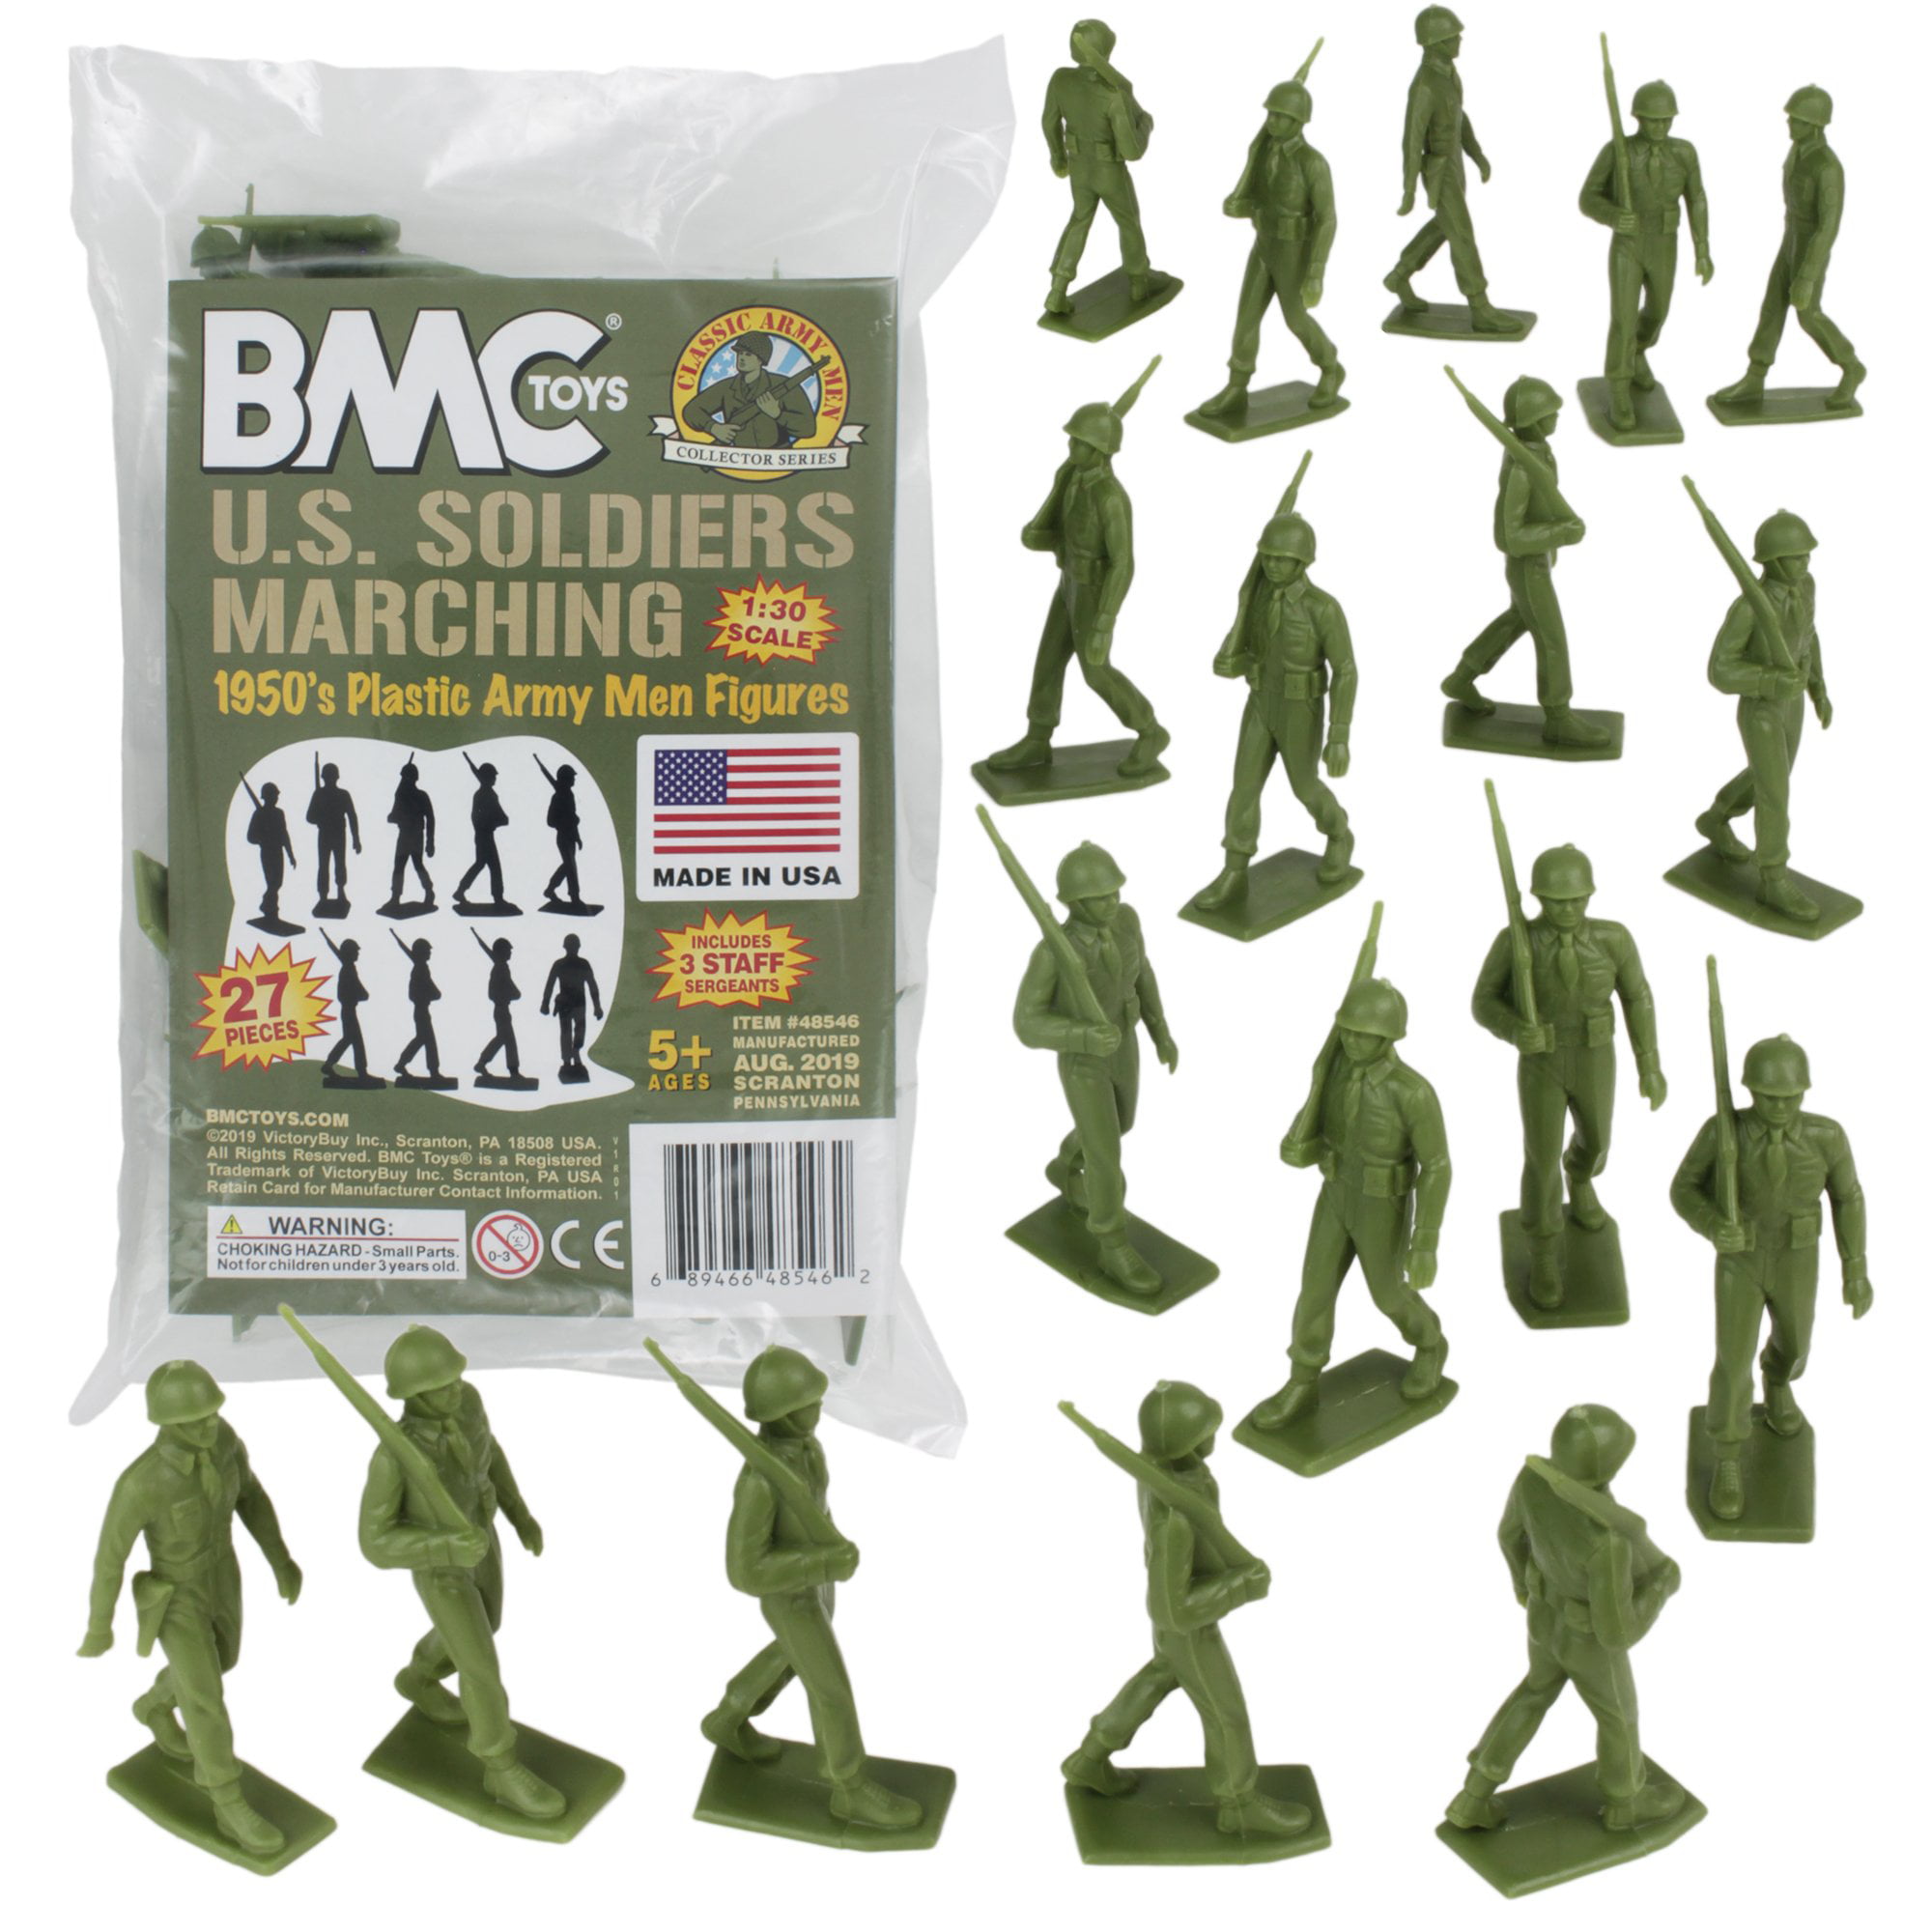 30 Imperial Soldiers of Japan 1:32 Figures BMC WW2 Japanese Plastic Army Men 